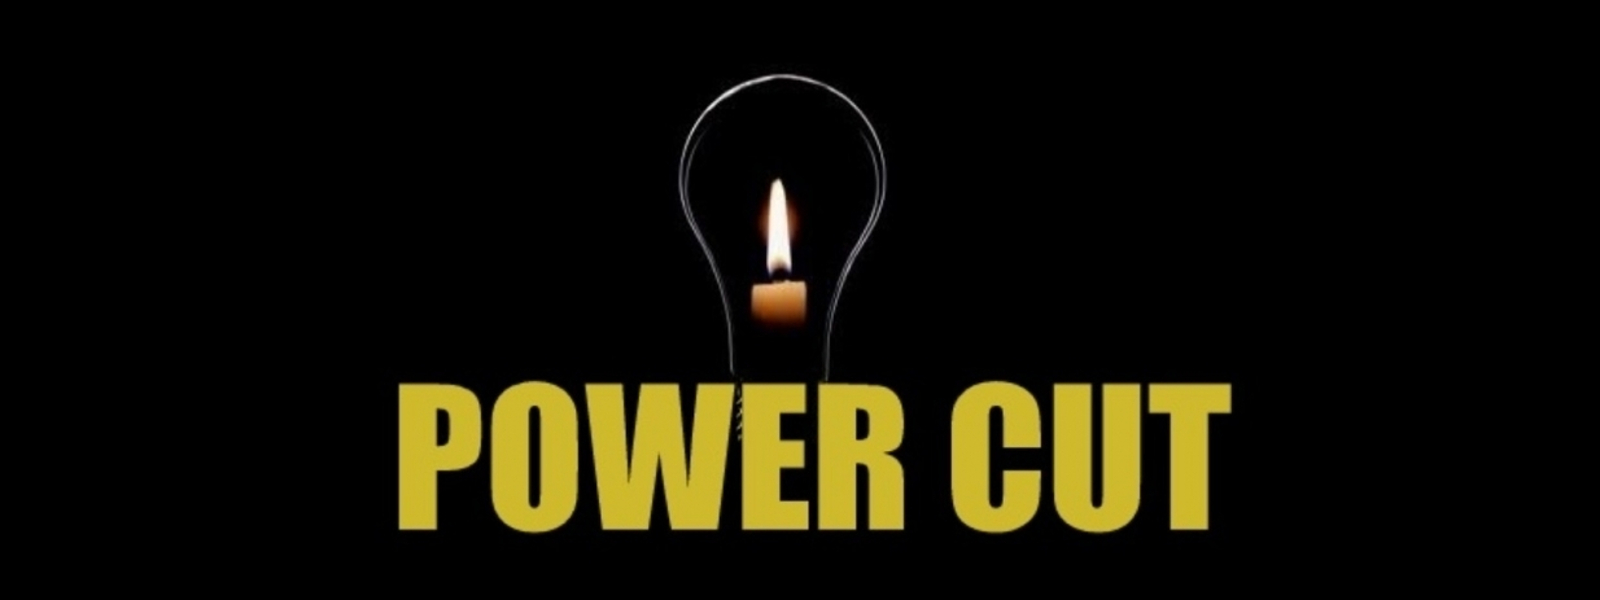 12-hour power cuts for Friday (01)